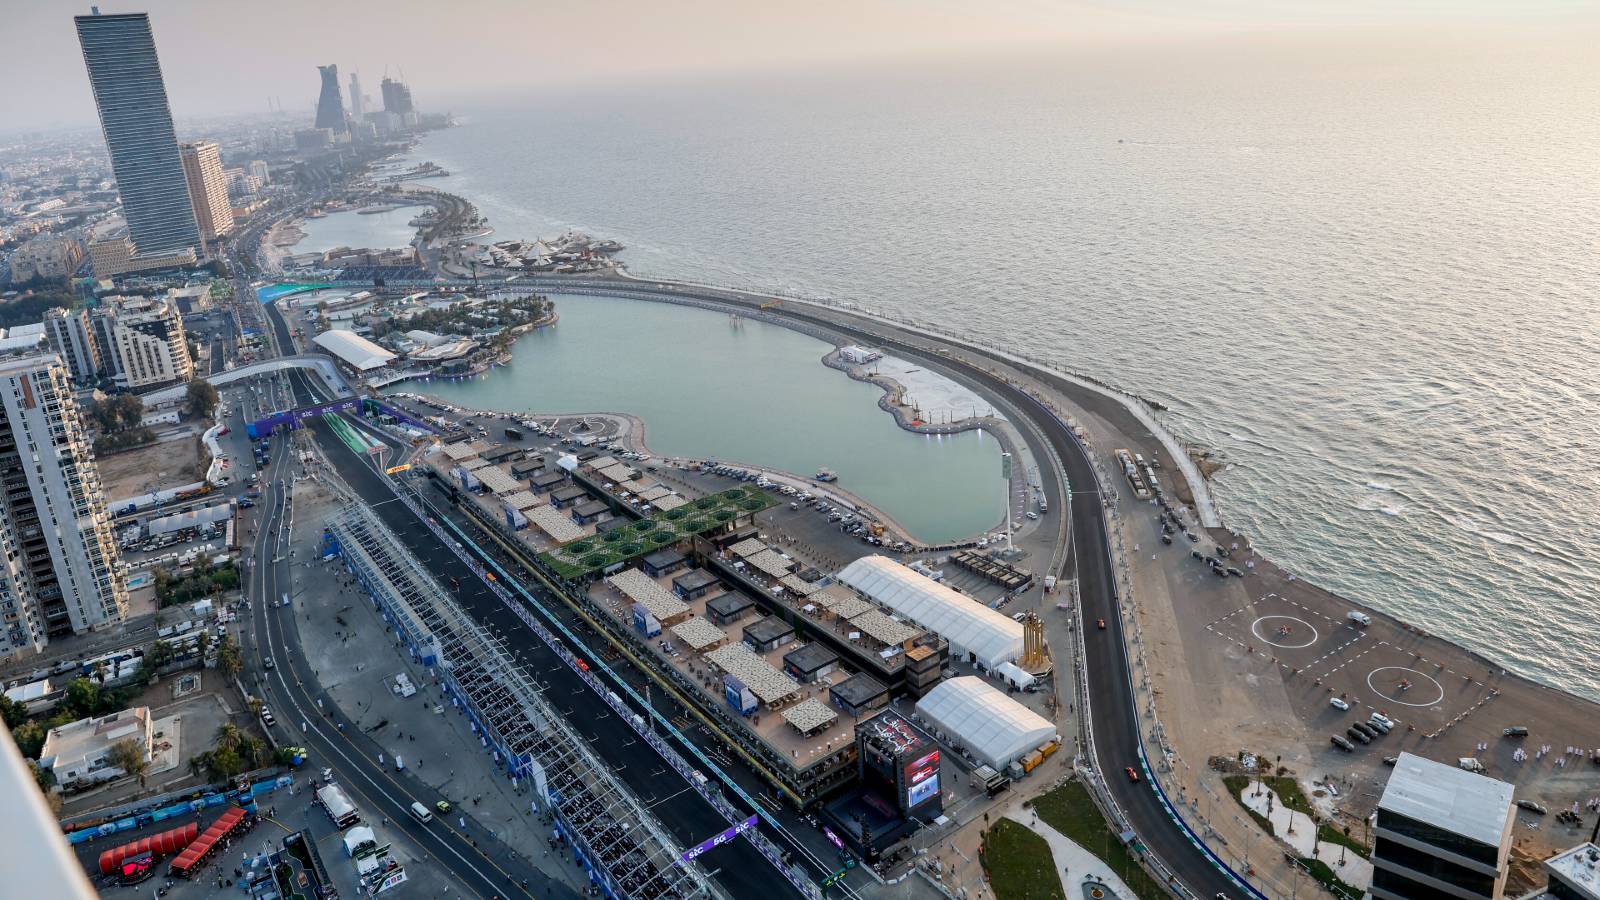 Overhead view of the Jeddah Circuit. December 2021.